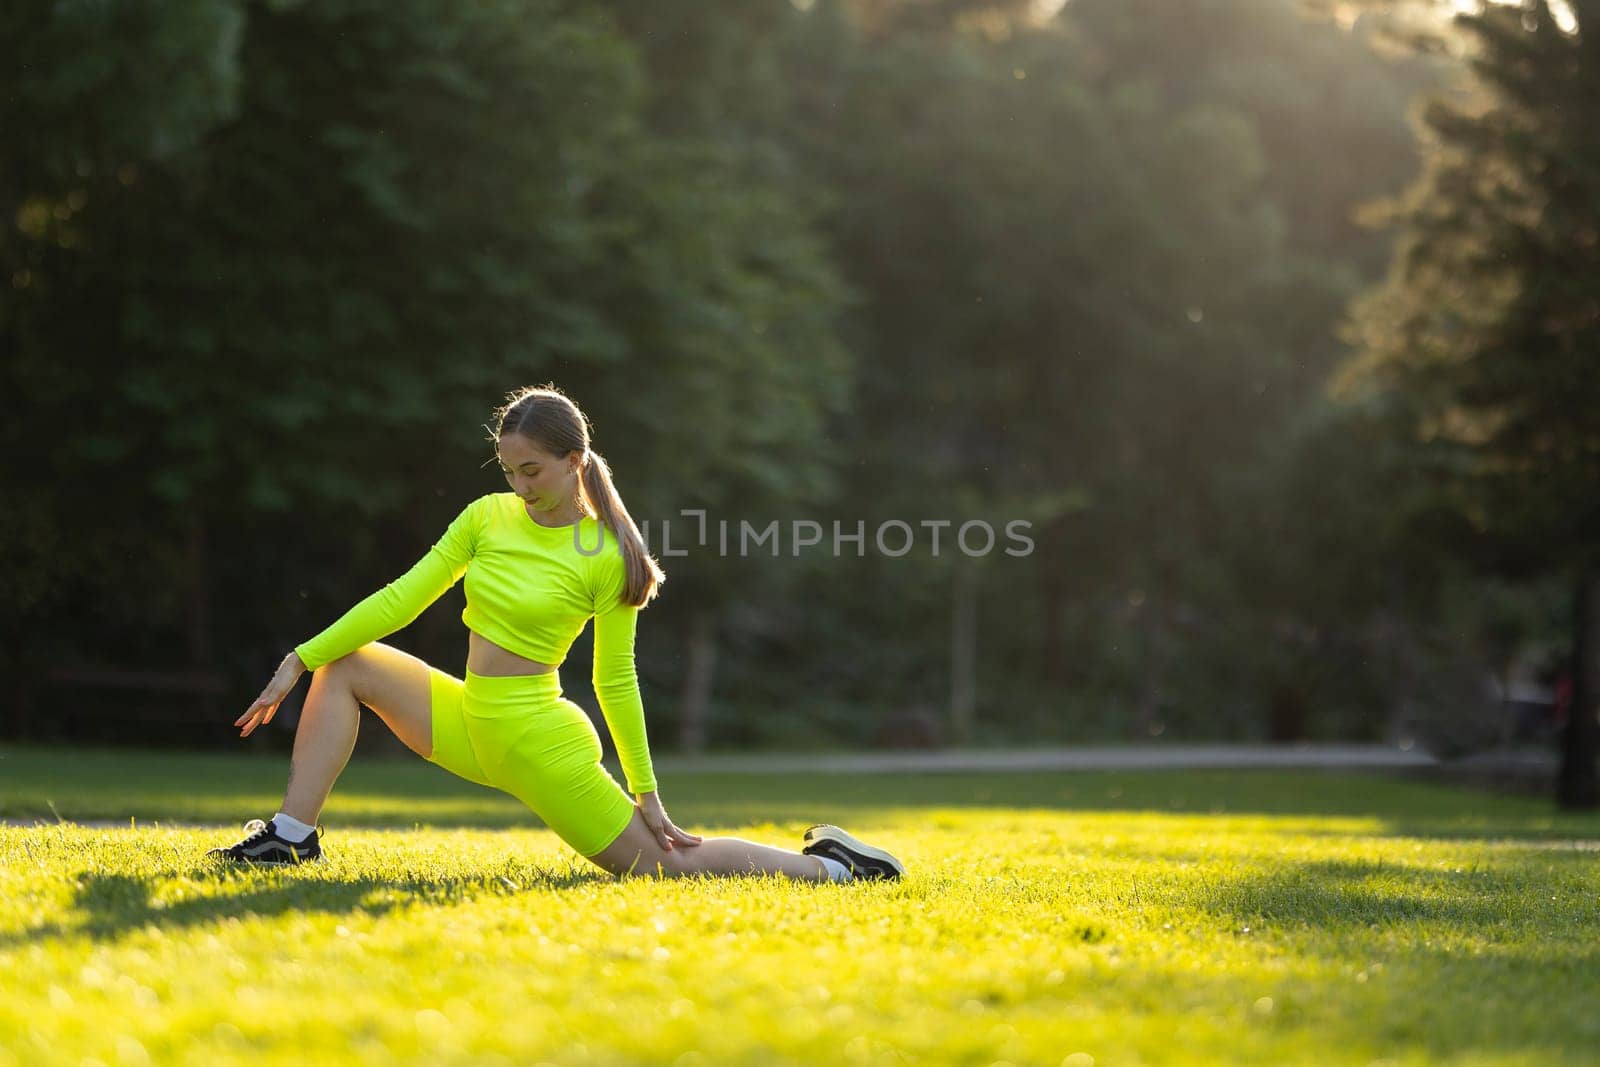 A happy woman in a neon yellow outfit is leisurely stretching her legs on the grass in a park, surrounded by lush greenery and other people enjoying nature